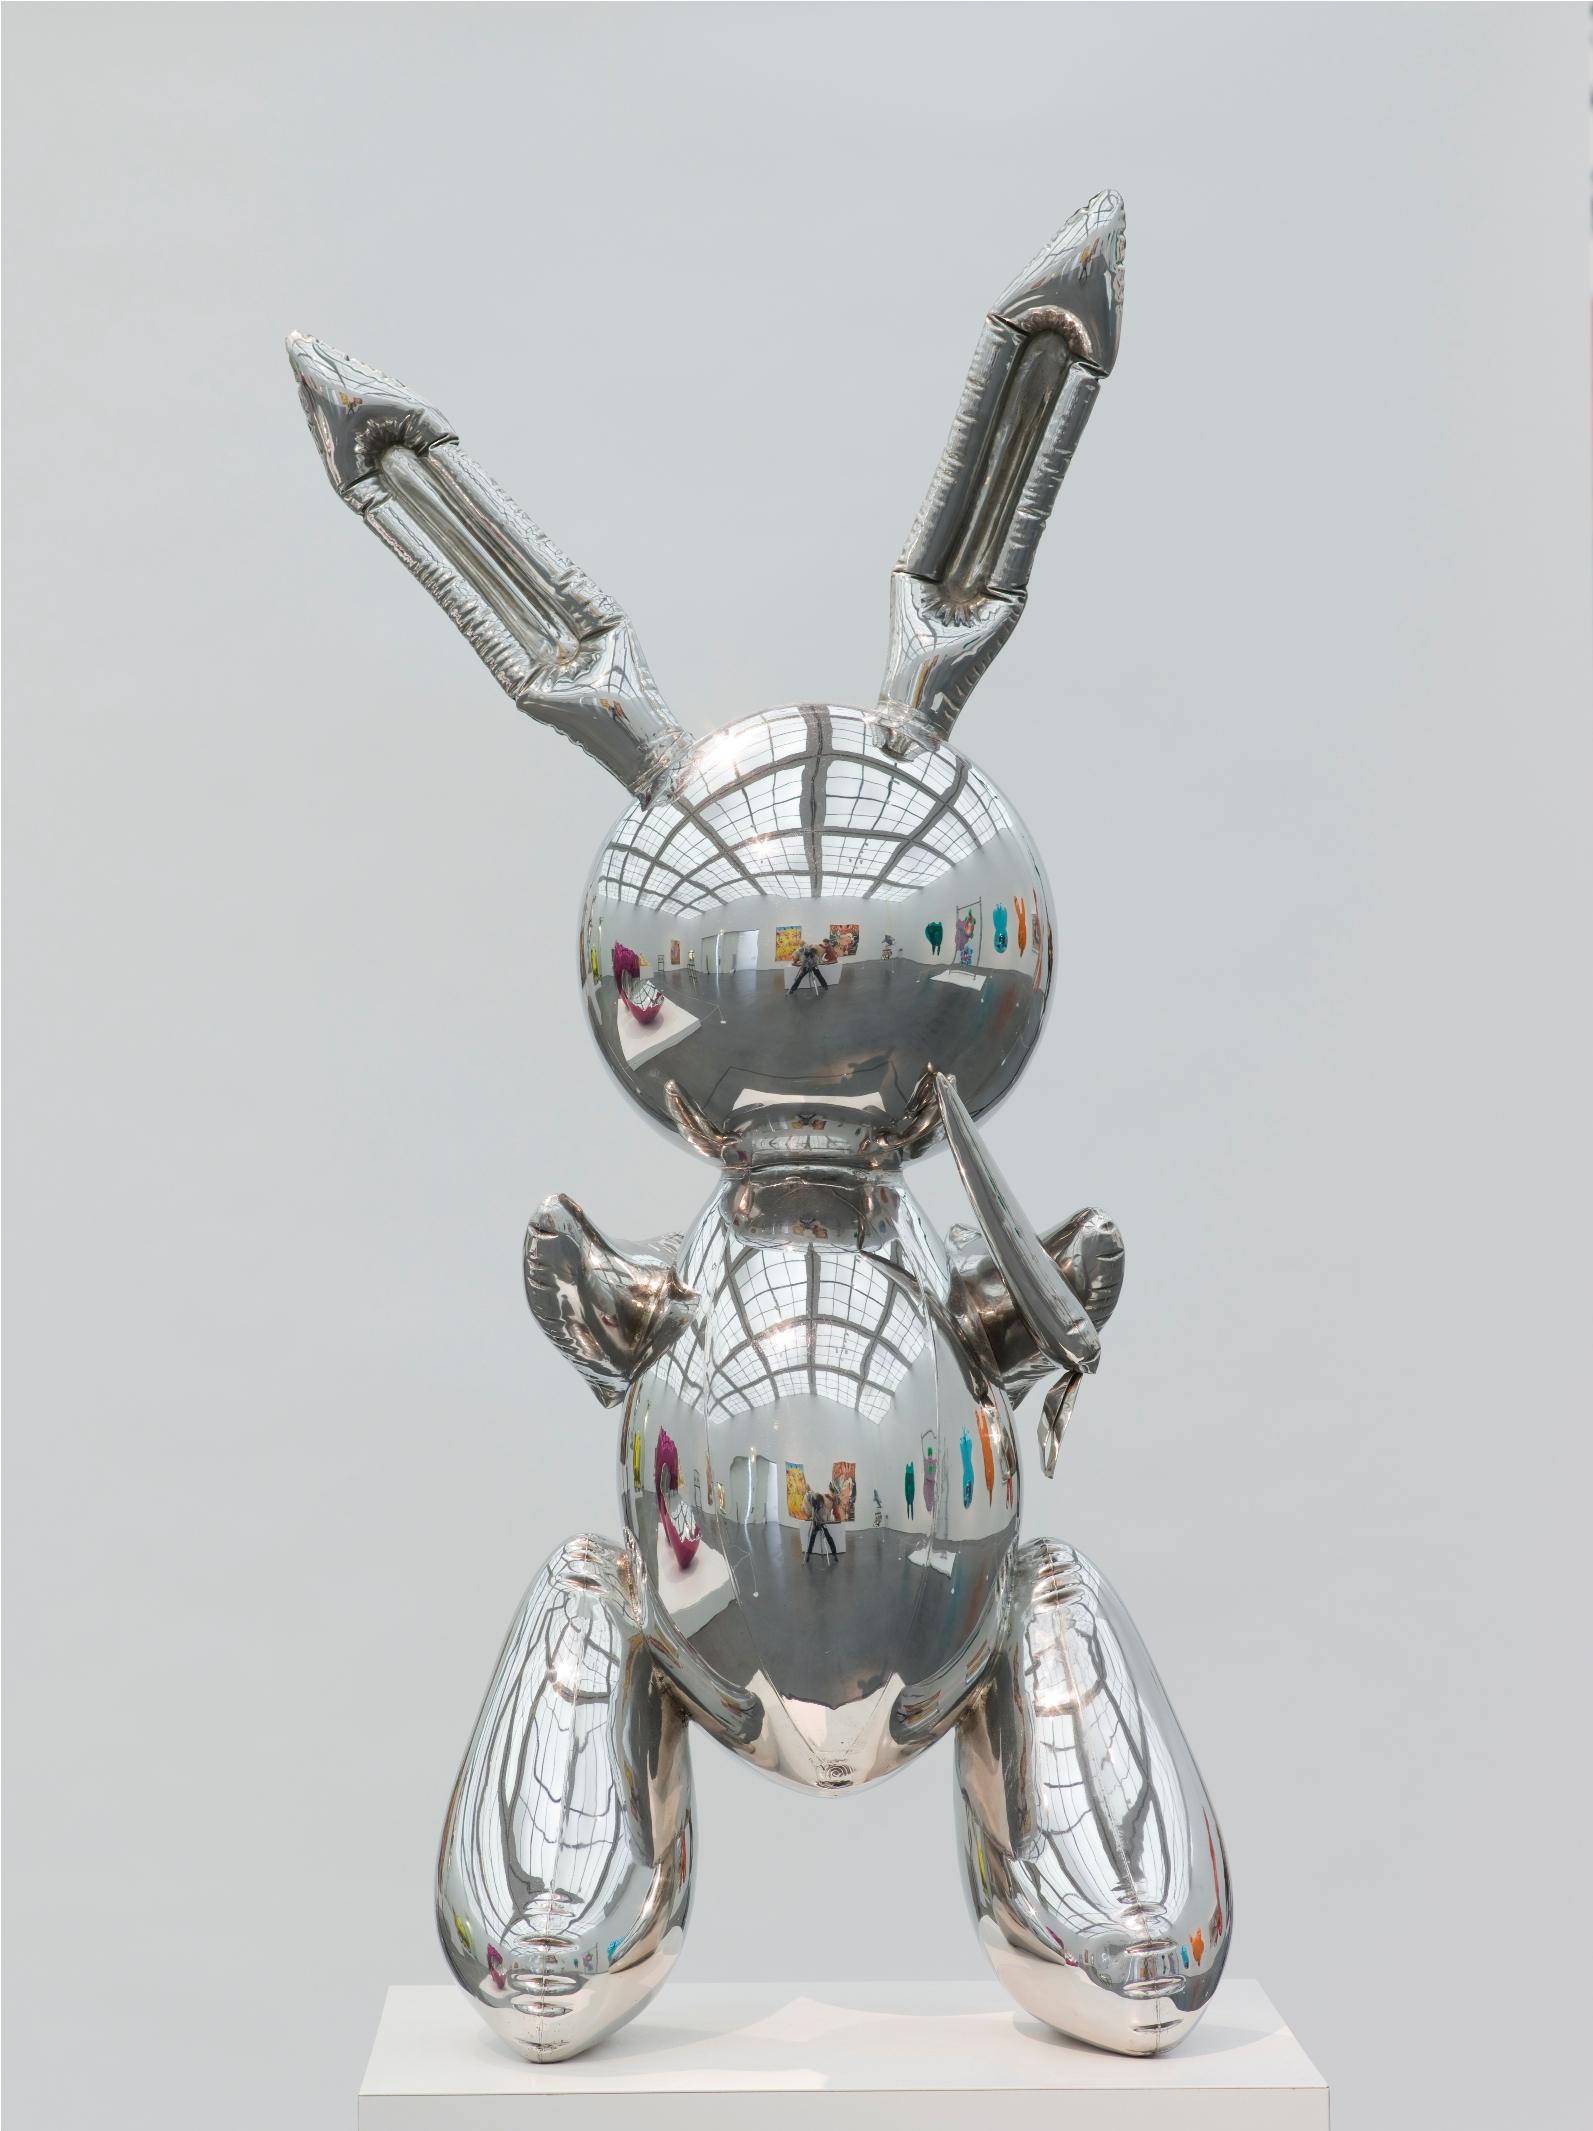 A highly reflective silver-metallic sculpture resembling an inflatable bunny